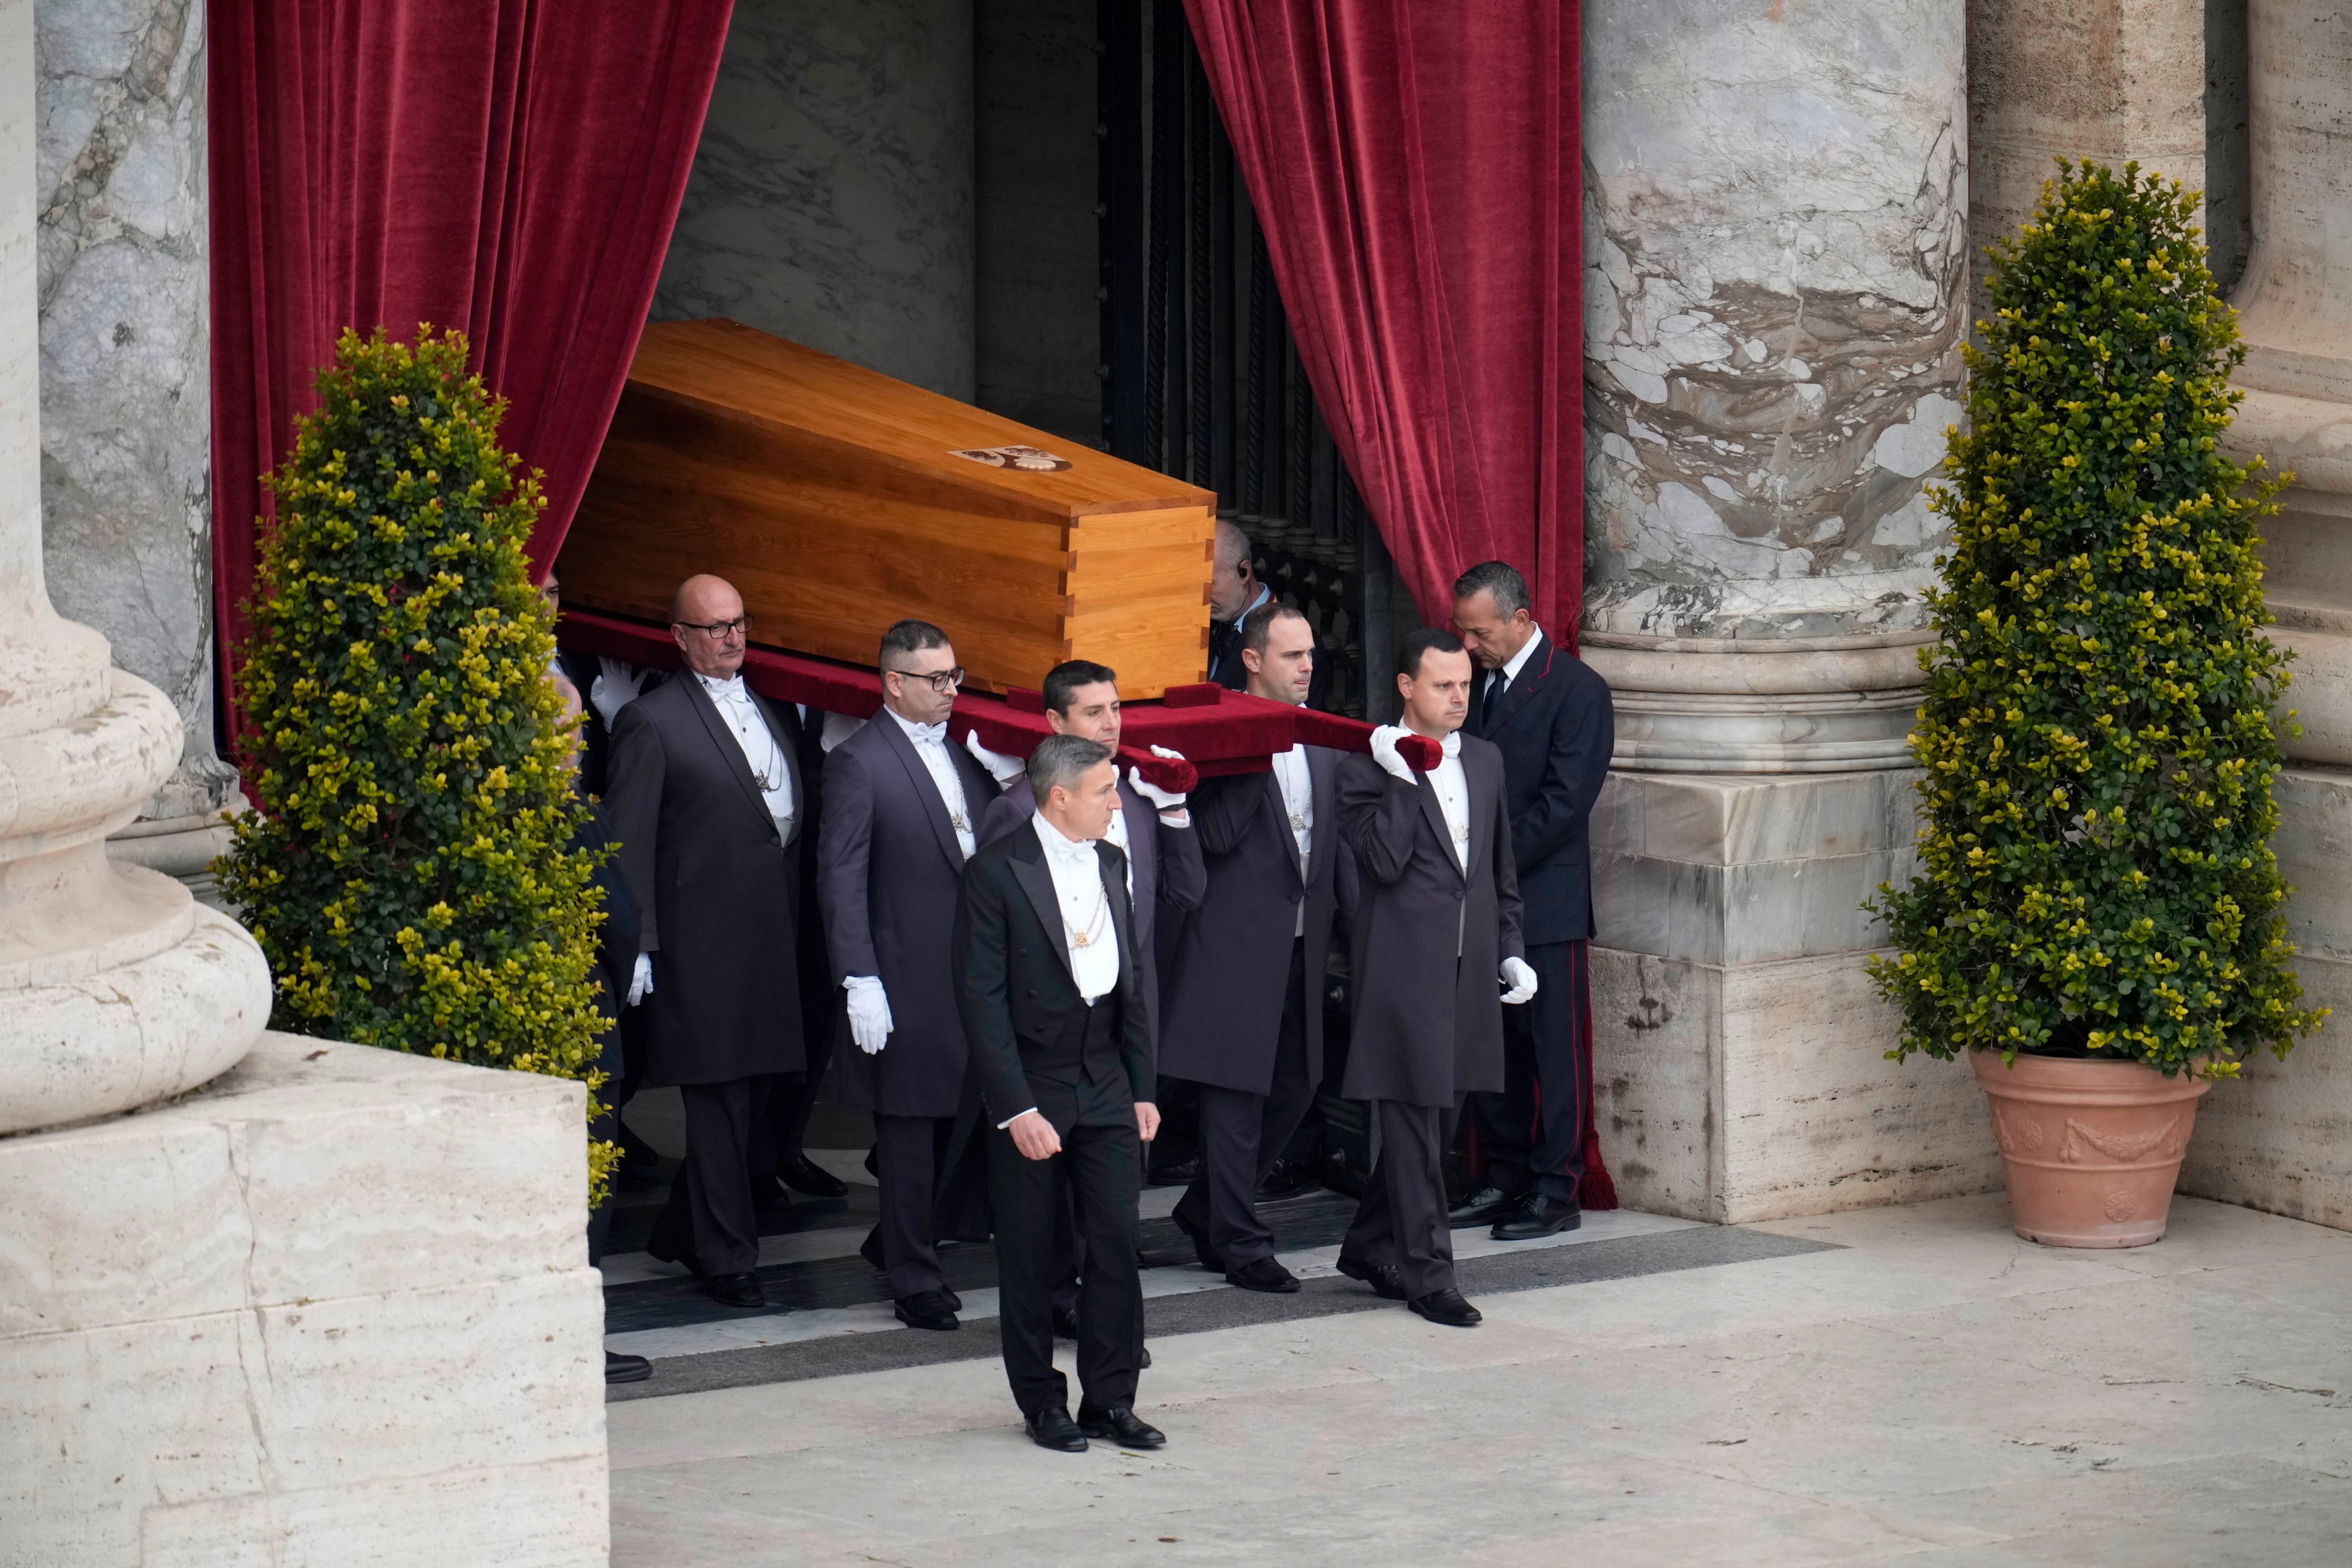 Mourners Gather In Vatican City On The Funeral Day Of Pope Emeritus Benedict XVI